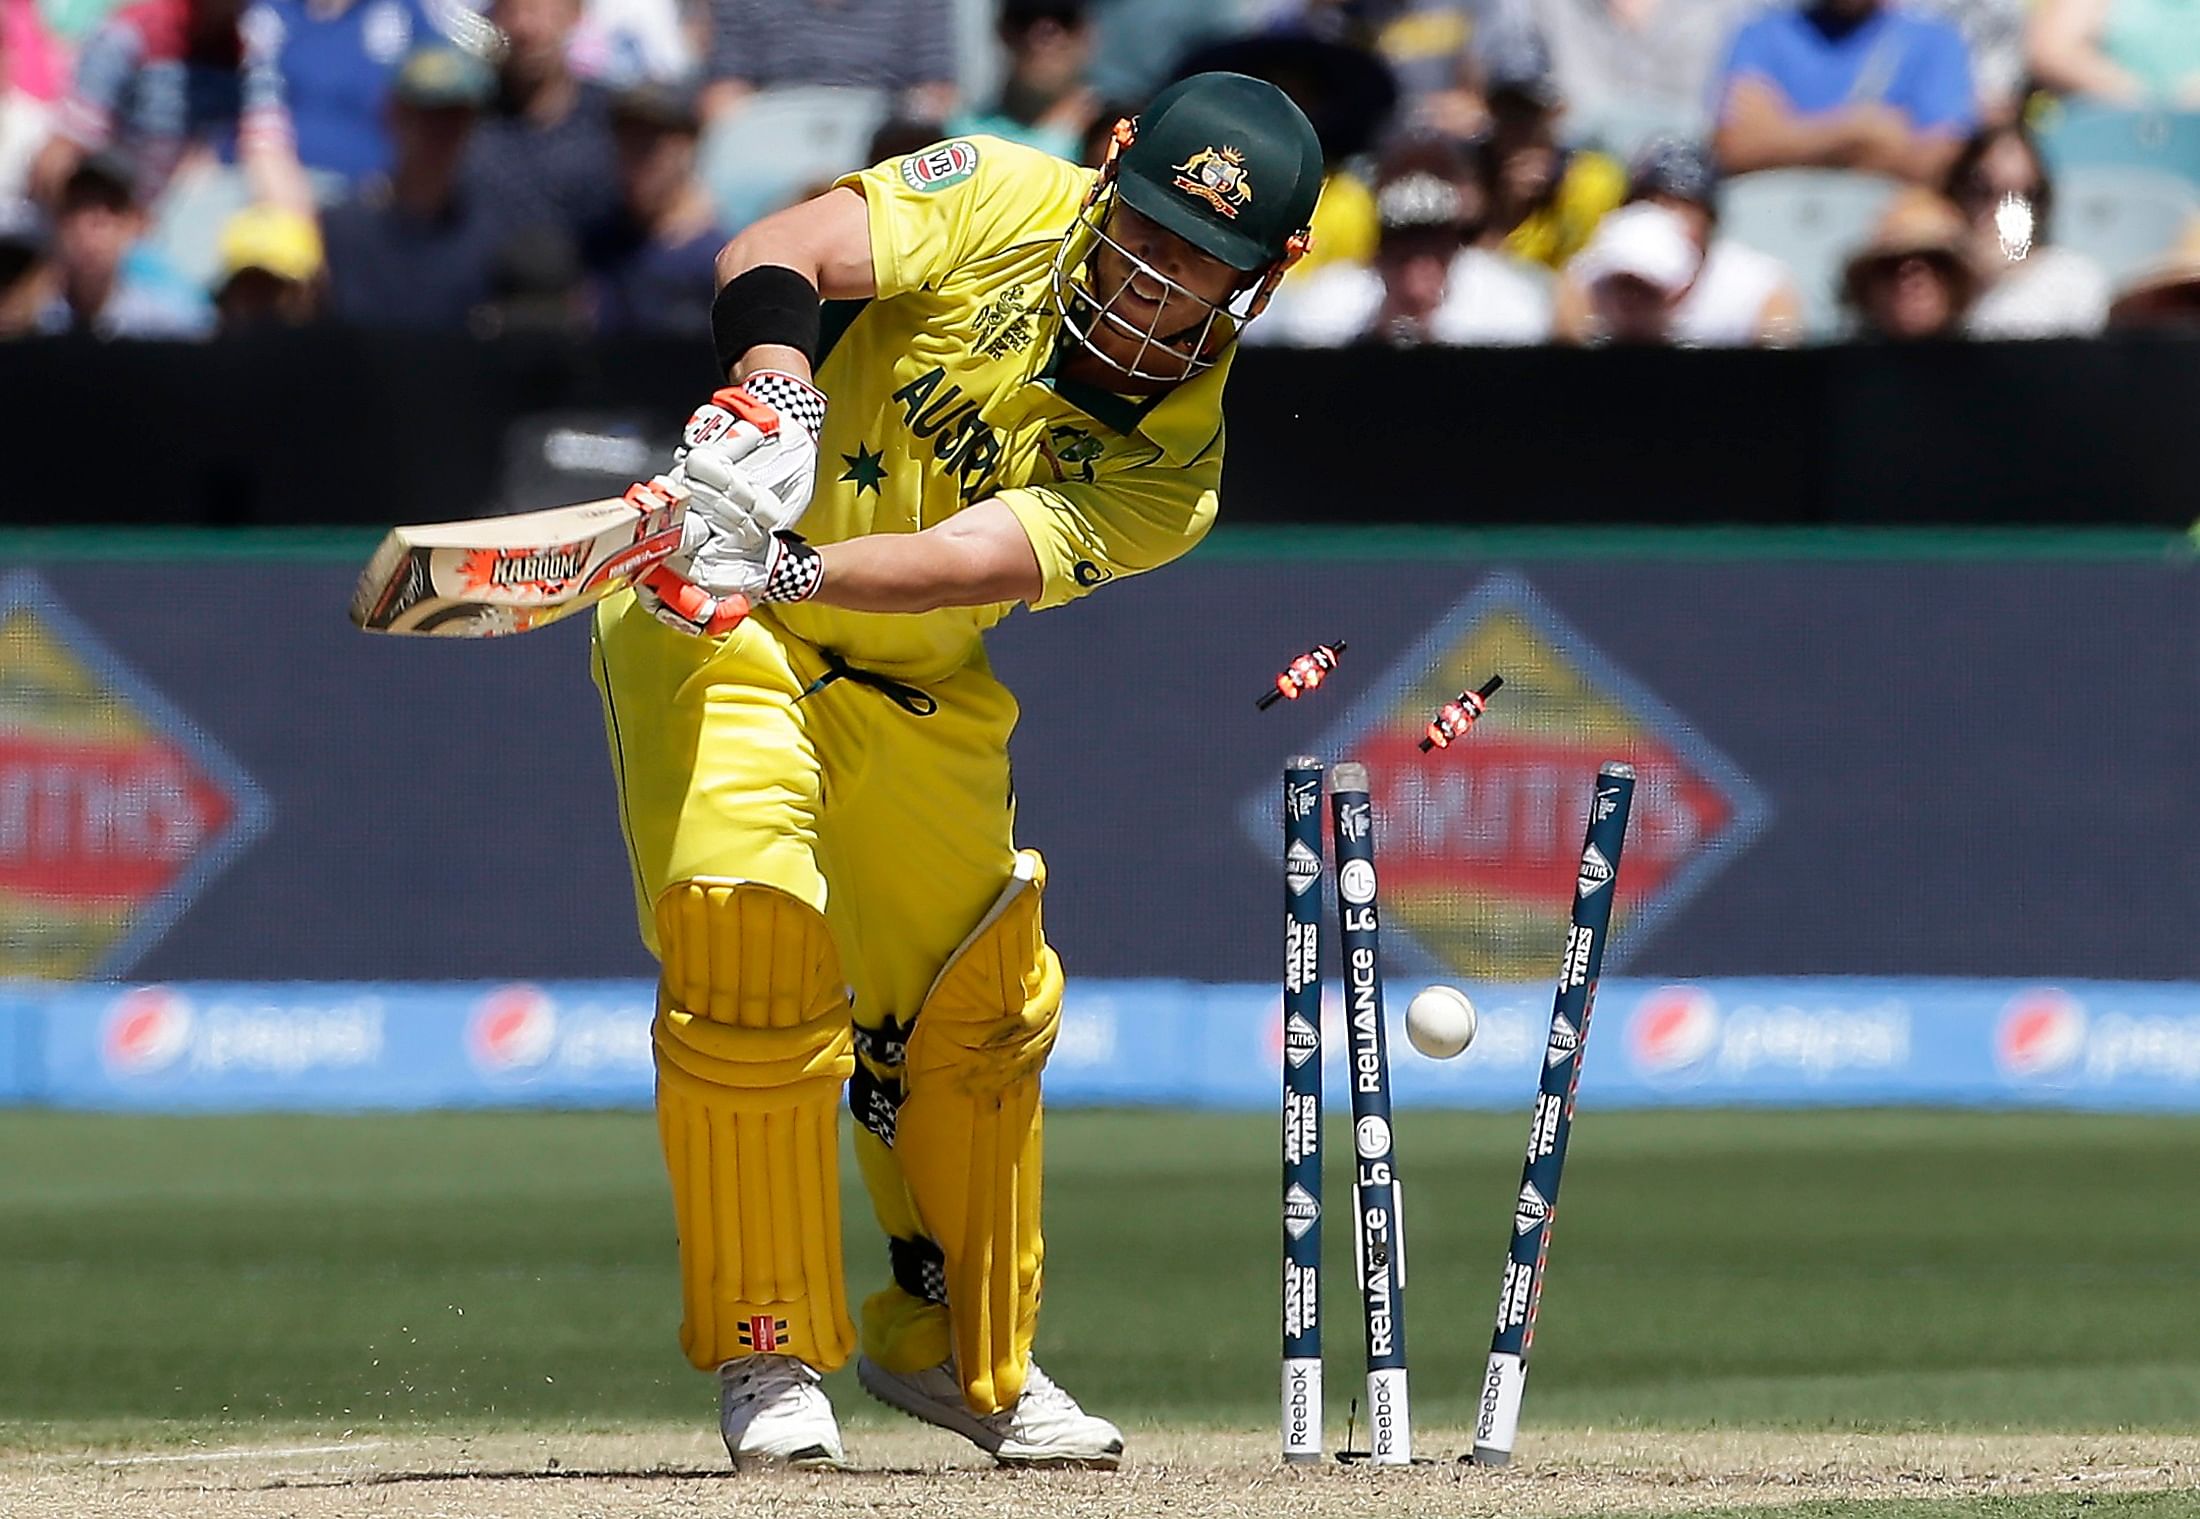 Australia's David Warner is bowled for 22 runs by England's Stuart Broad during their Cricket World Cup match at the Melbourne Cricket Ground (MCG) February 14, 2015. Photo: Reuters